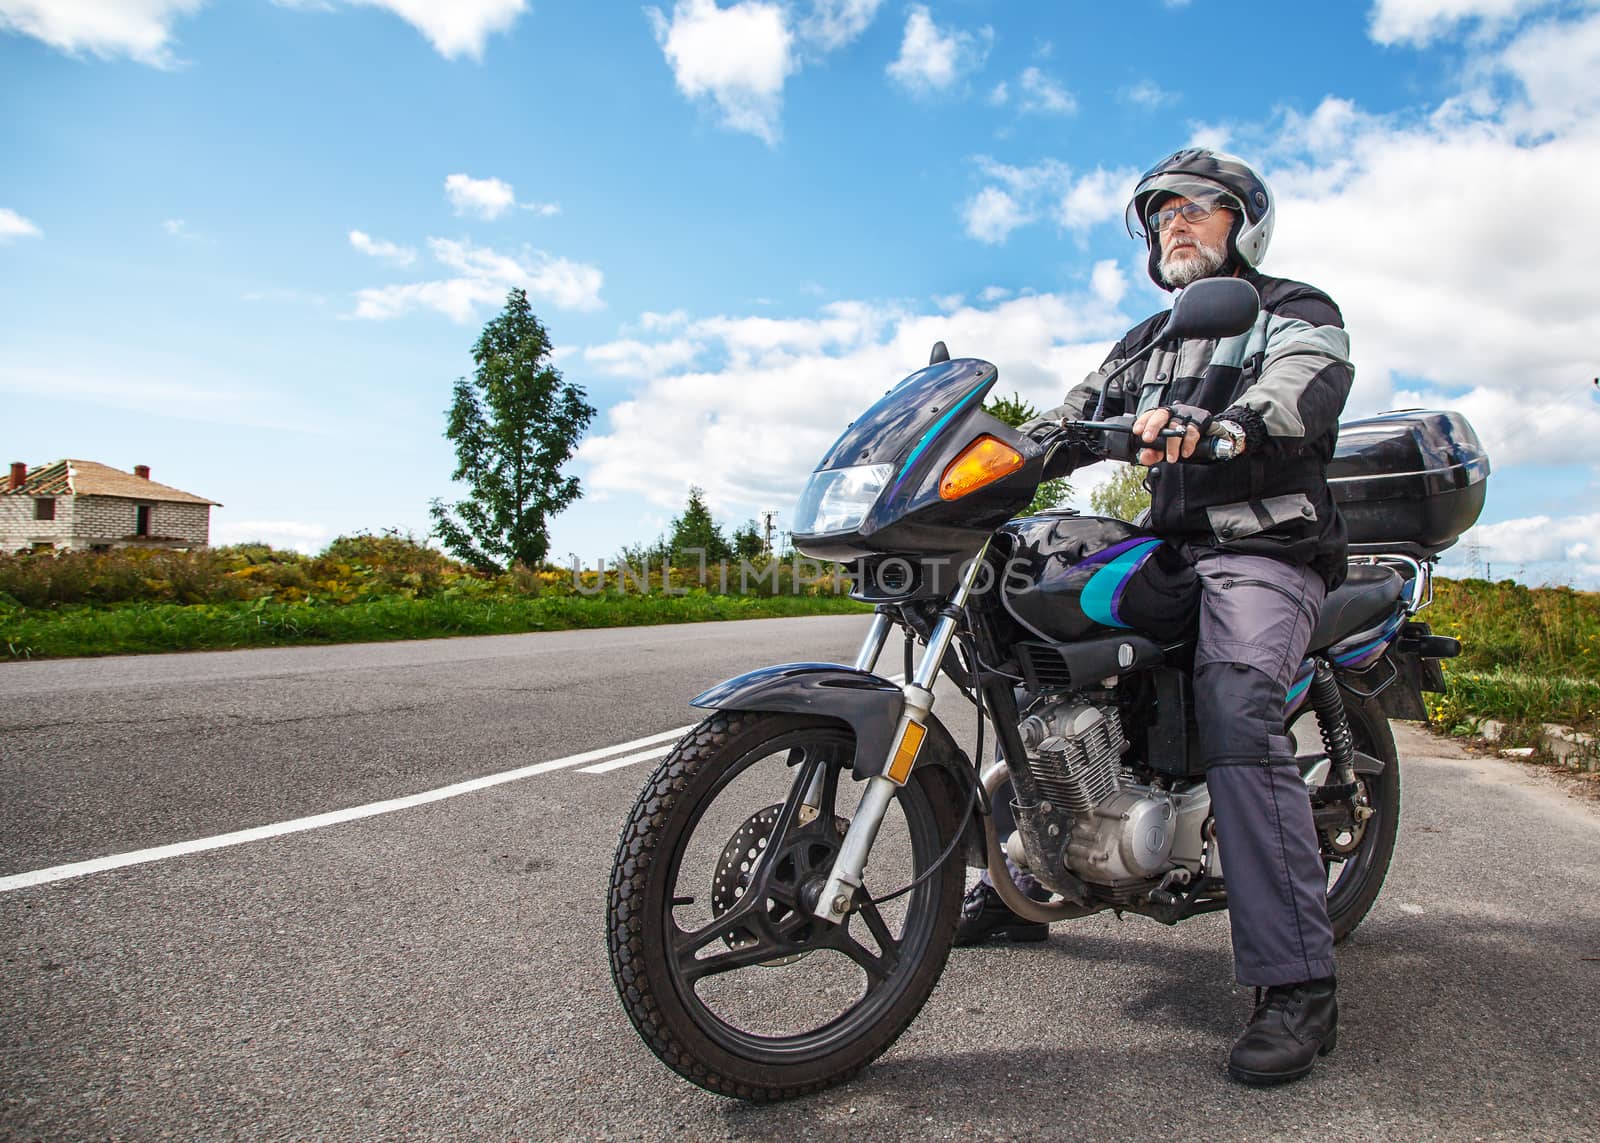 elderly motorcyclist wearing a jacket and glasses with a helmet sitting on his motorcycle on the open road